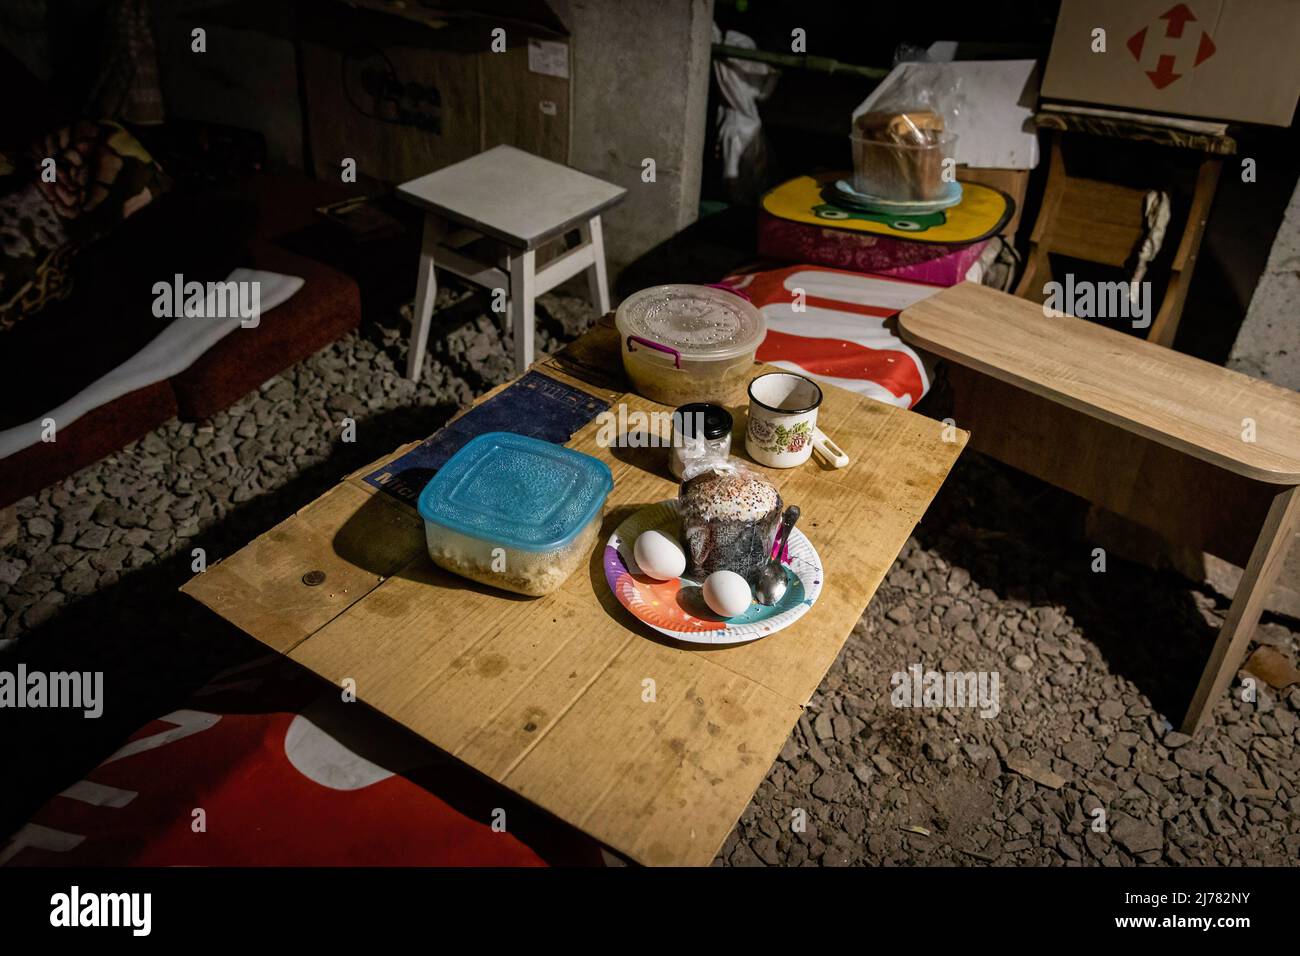 An Easter cupcake and food are seen on a table in a underground bunker in southeastern Kharkiv. Citizens in Kharkiv have been forced to adopt a new life underground in bunkers without electricity and water, as the second biggest city in Ukraine now faces under constant threat of Russian bombardment and airstrikes. Stock Photo